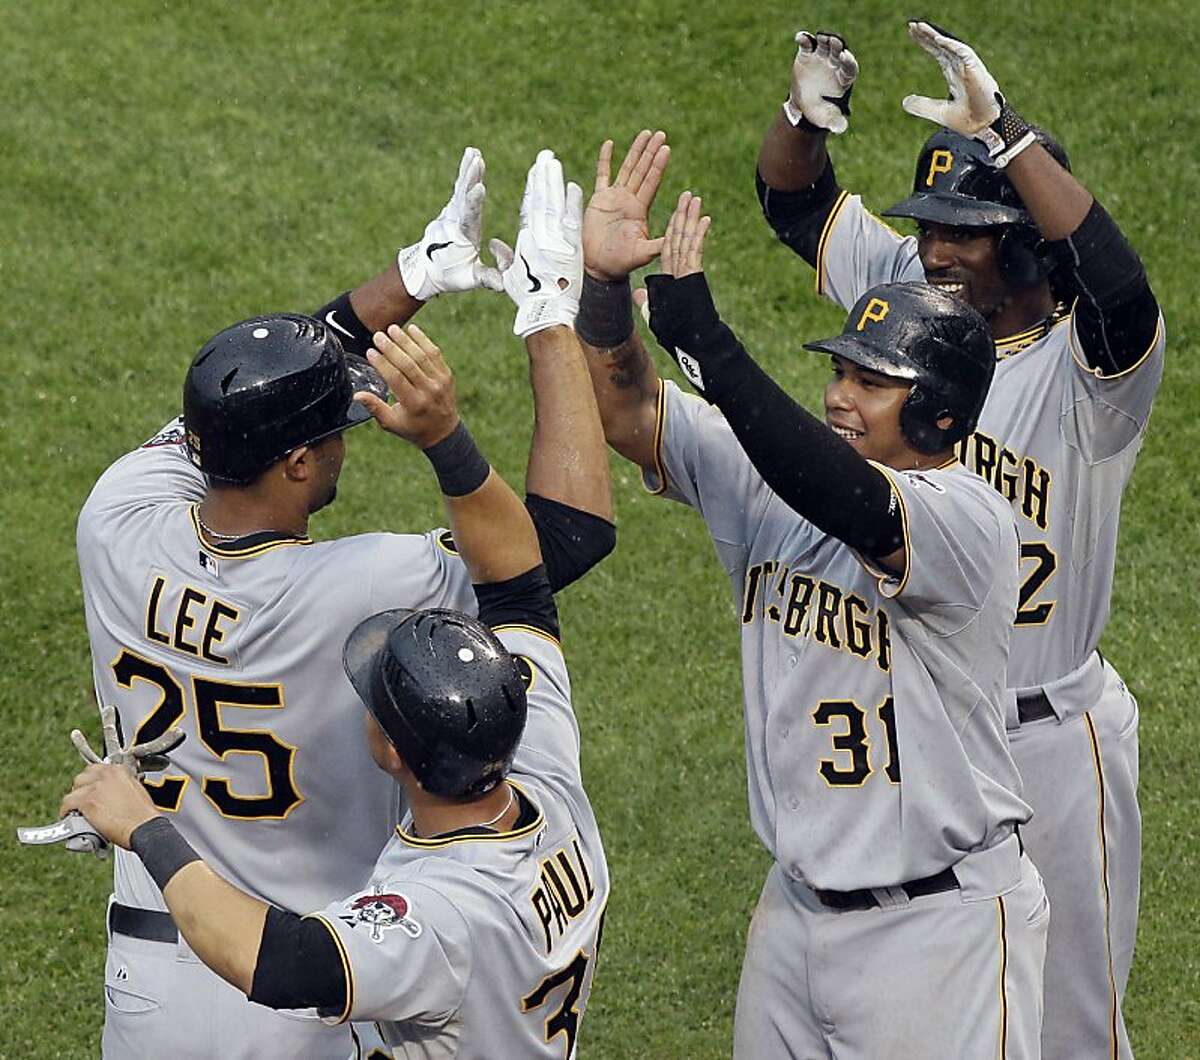 Pittsburgh Pirates' Derrek Lee (25) celebrates with teammates Xavier Paul (38), Jose Tabata (31) and Andrew McCutchen (22) after hitting a grand slam during the ninth inning of a baseball game against the Chicago Cubs on Saturday, Sept. 3, 2011, in Chicago. The Pirates won 7-5. (AP Photo/Nam Y. Huh)